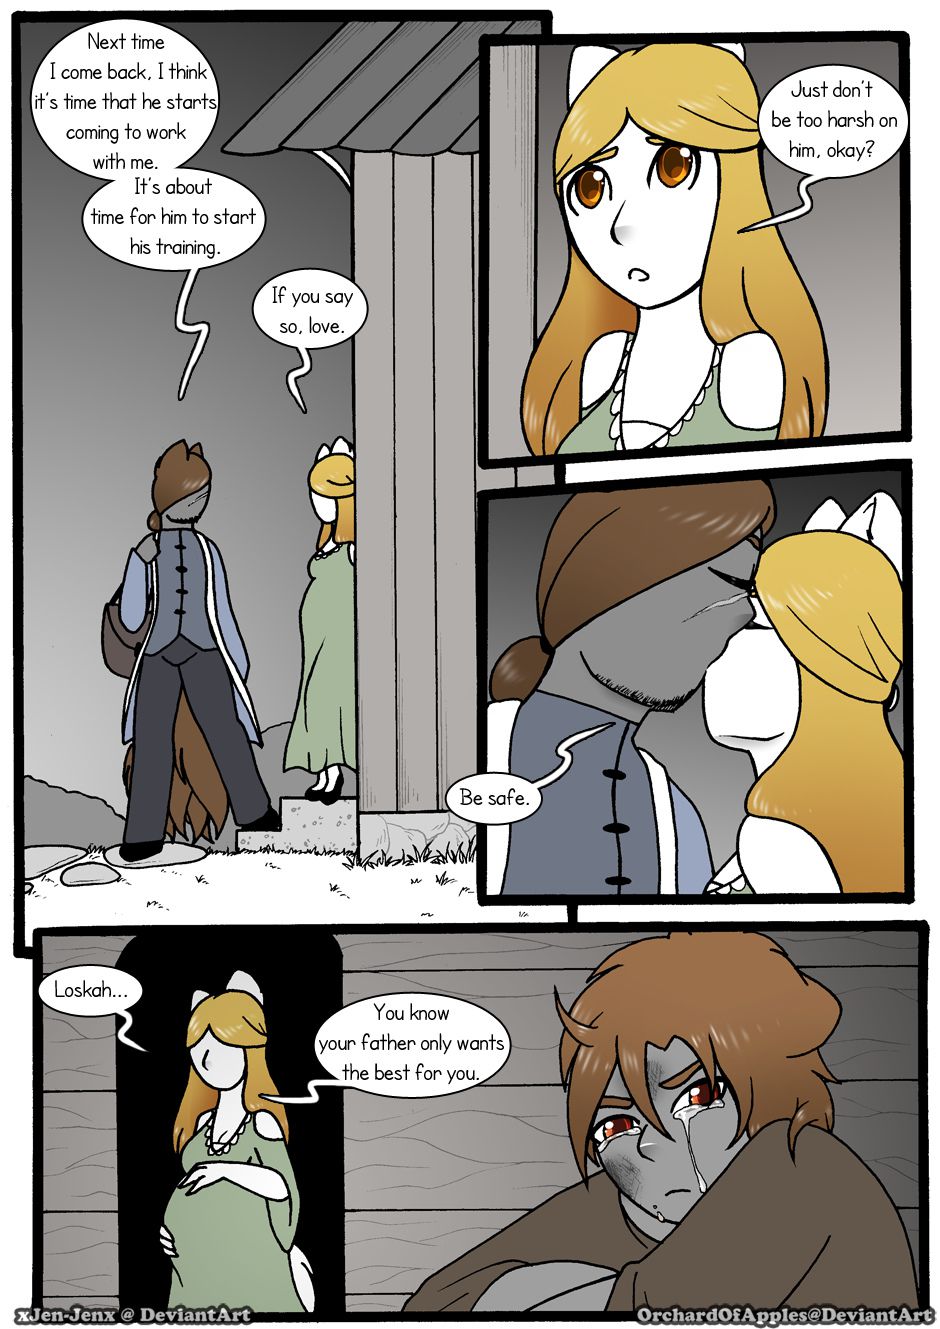 [Jeny-jen94] Between Kings and Queens [Ongoing] 227